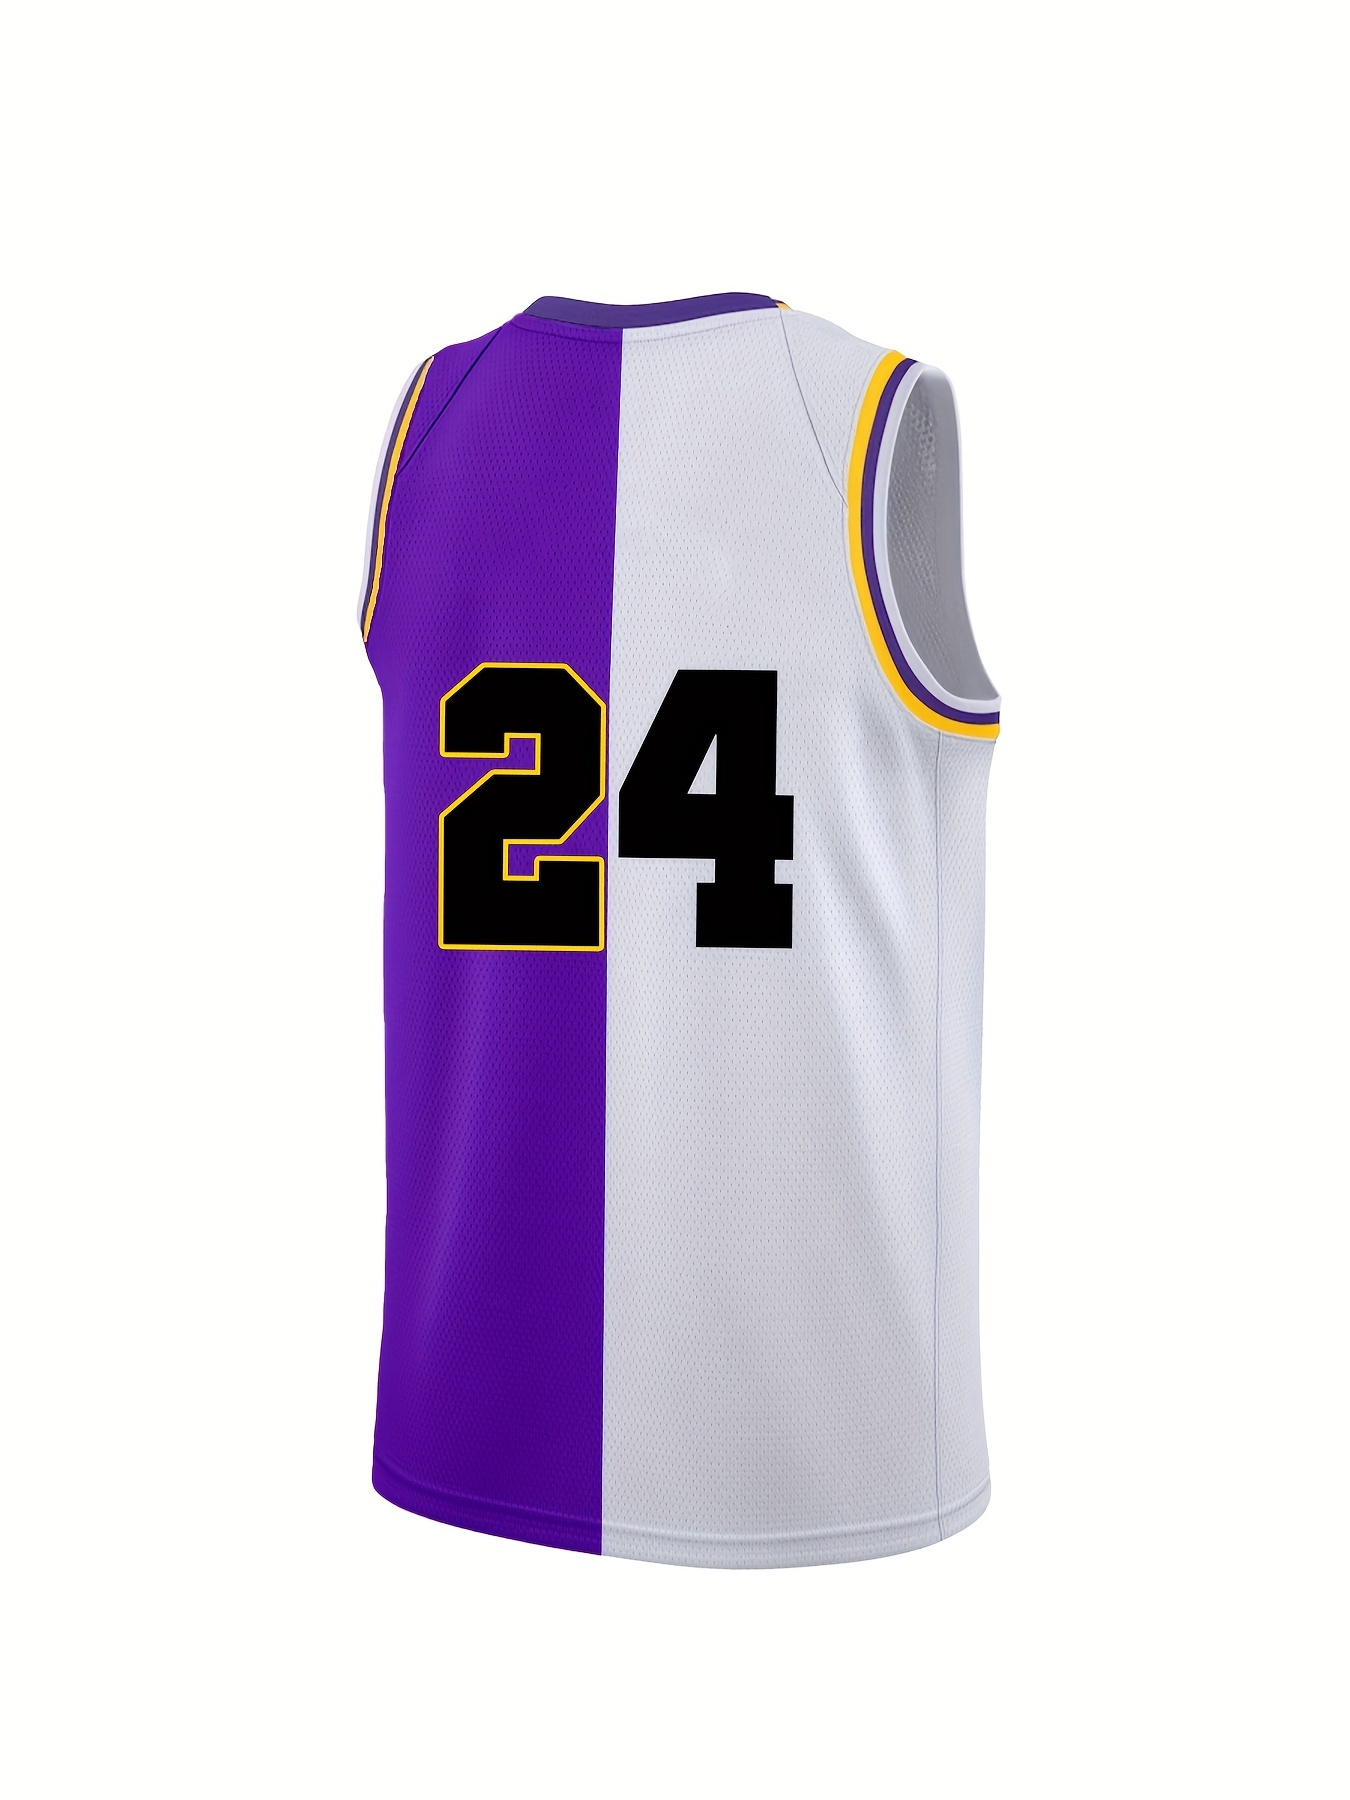 Temu Men's Los Angeles #824 Breathable Embroidery Basketball Jersey, Mens Vintage Round Neck Sleeveless Uniform Basketball Shirt for Training